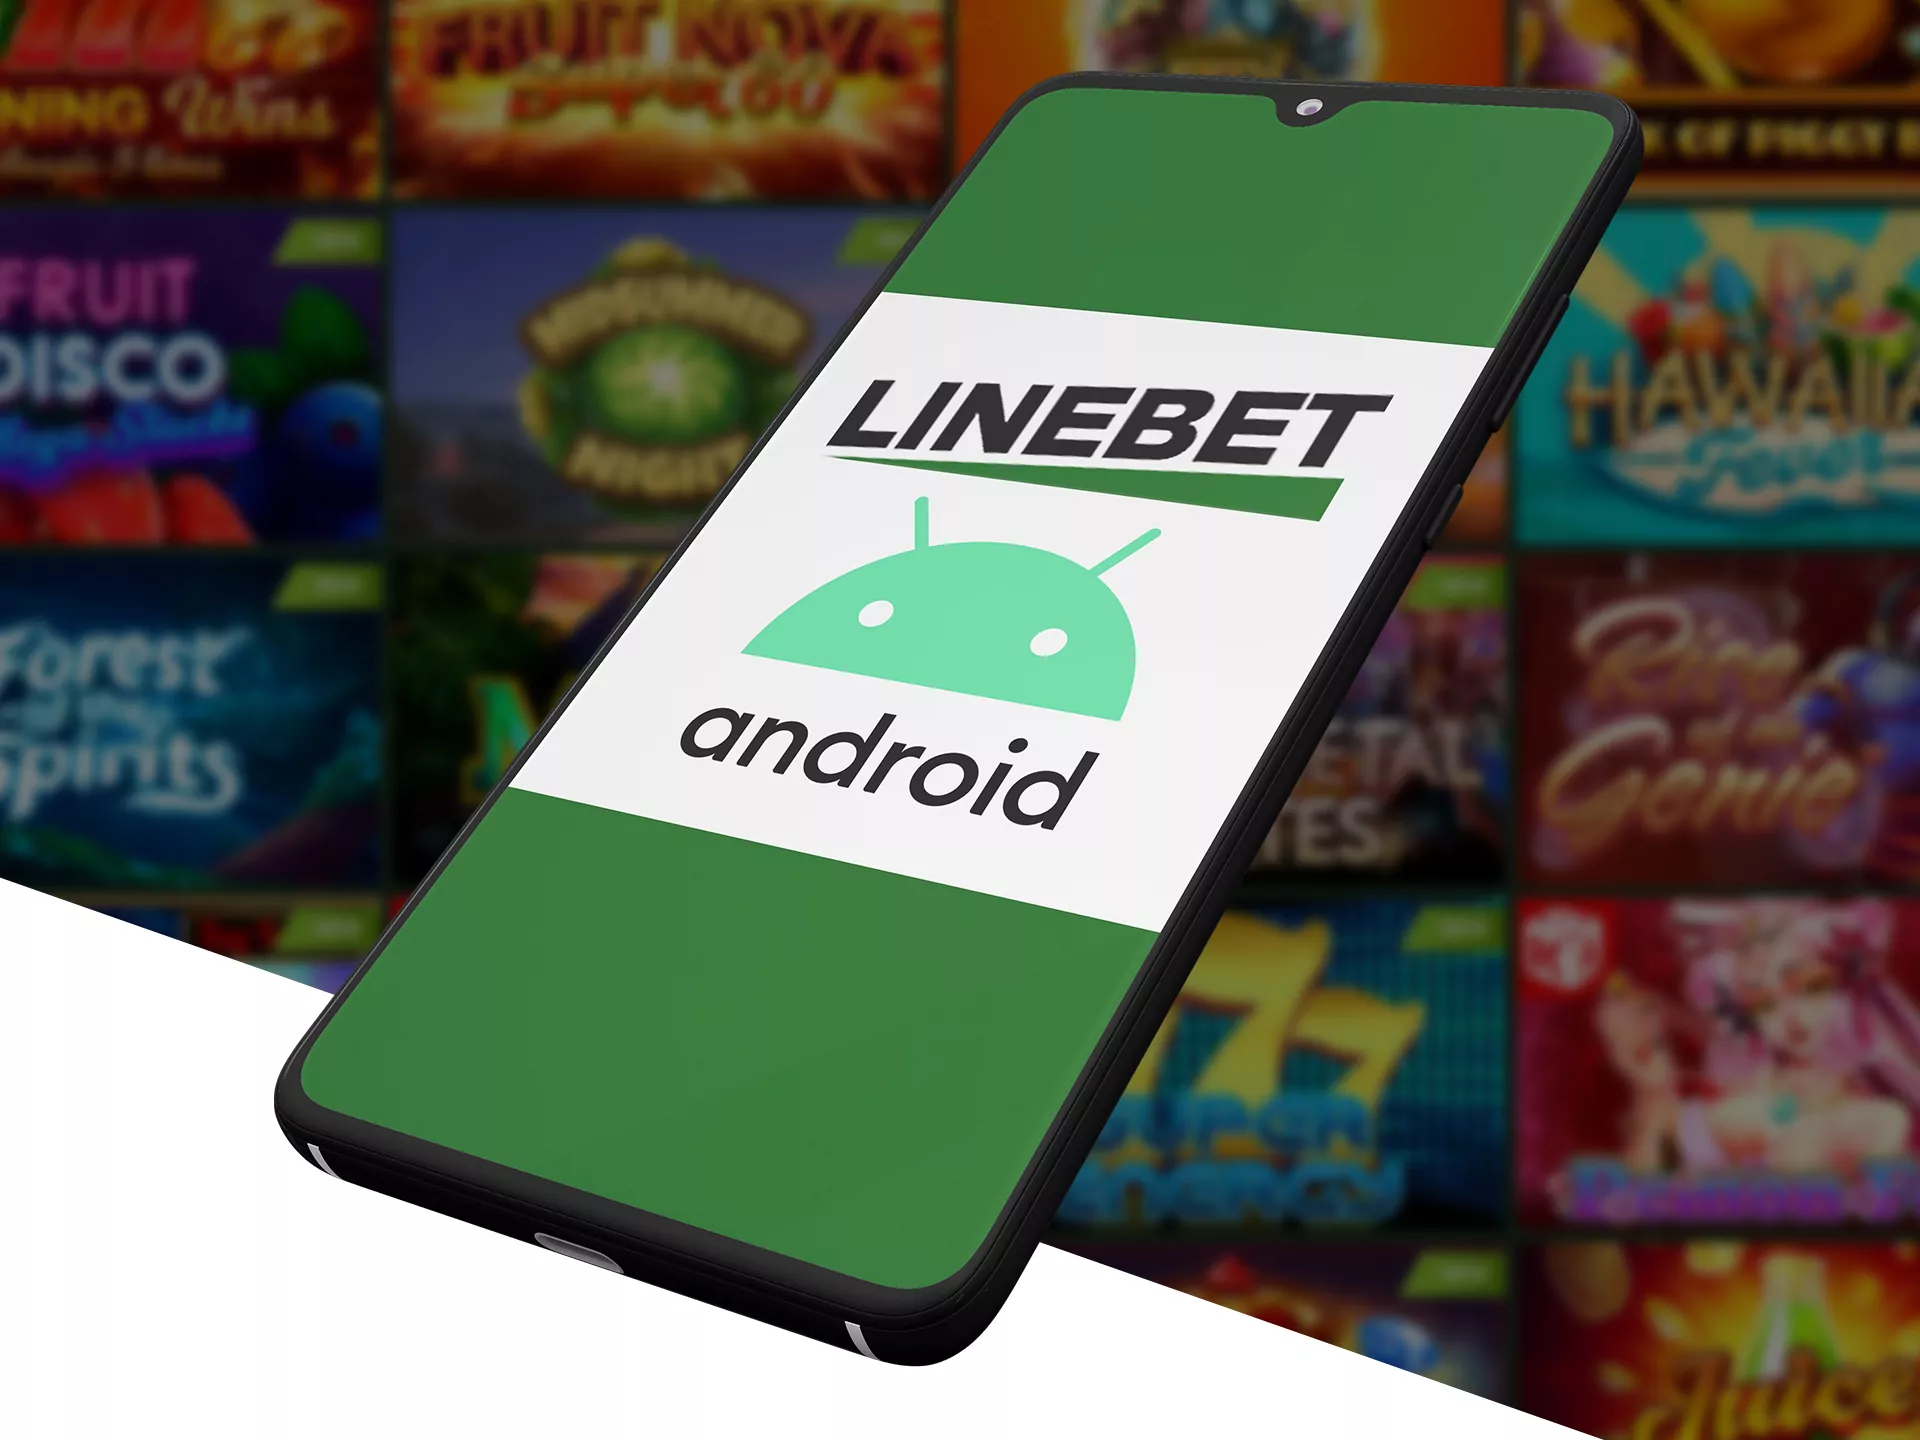 You can install Linebet app on any android device.